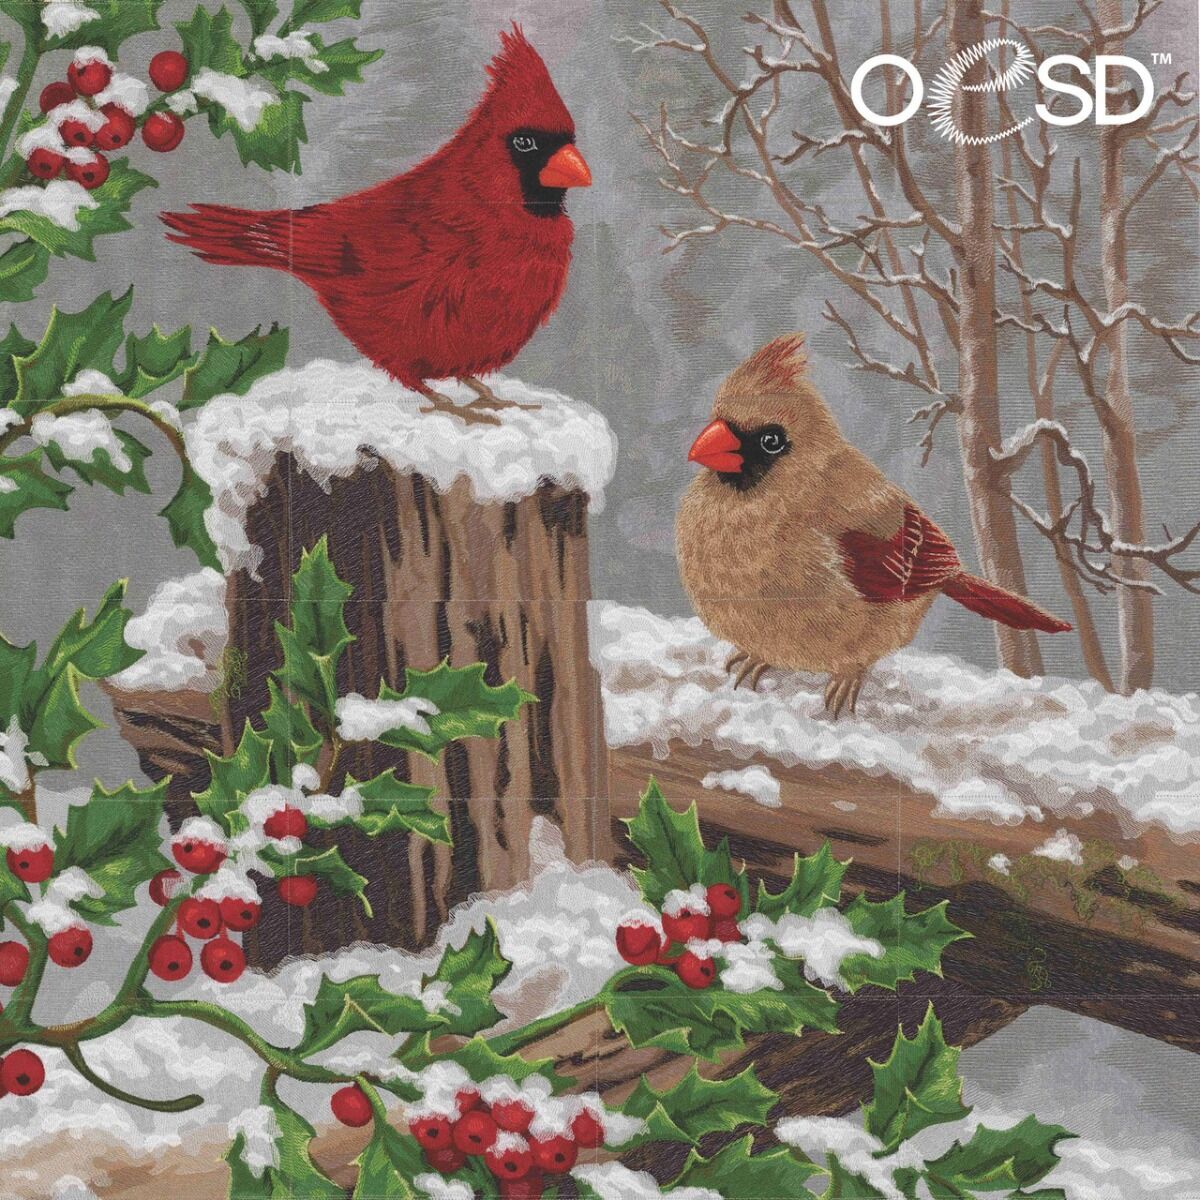 OESD  Winter Visitors by Dona Gelsinger,OESD  Winter Visitors by Dona Gelsinger,OESD  Winter Visitors by Dona Gelsinger